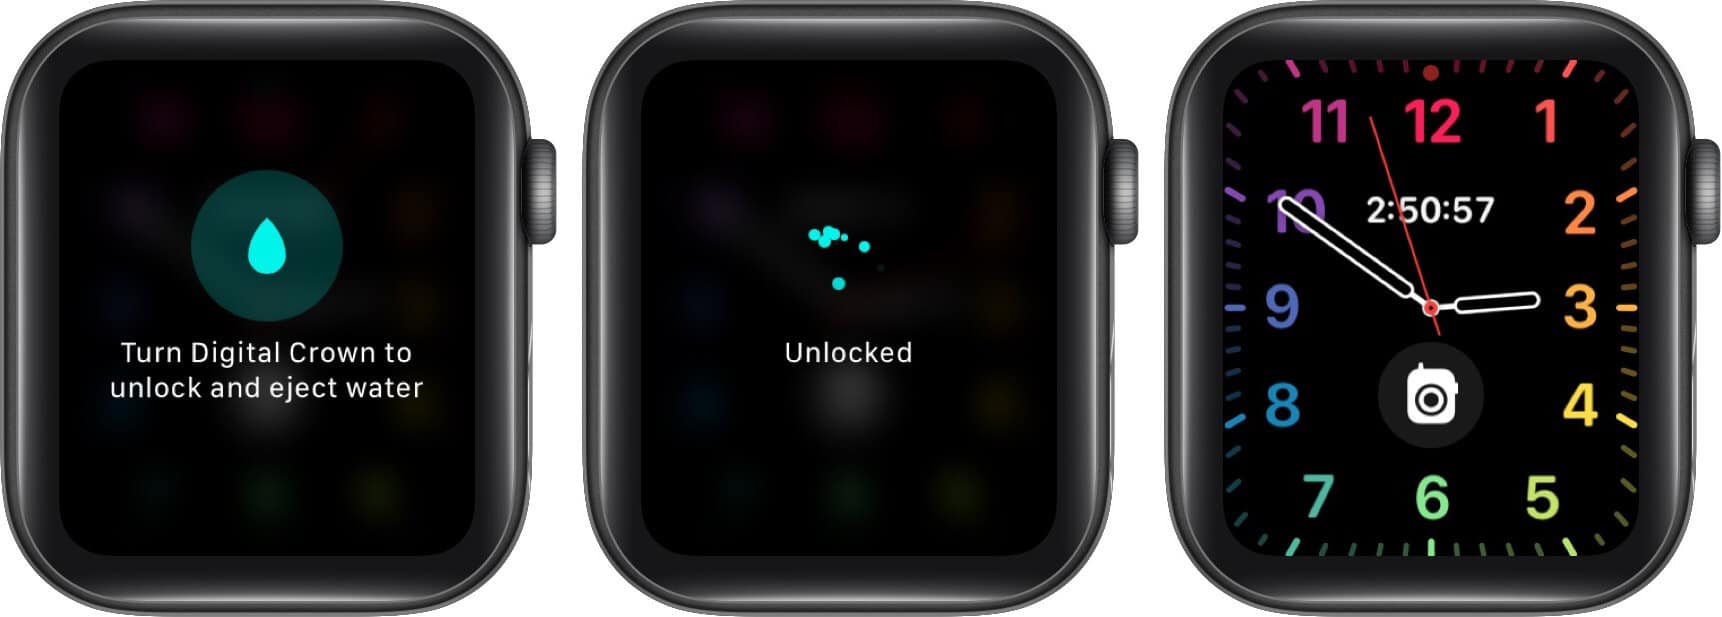 turn off water lock and eject water from apple watch